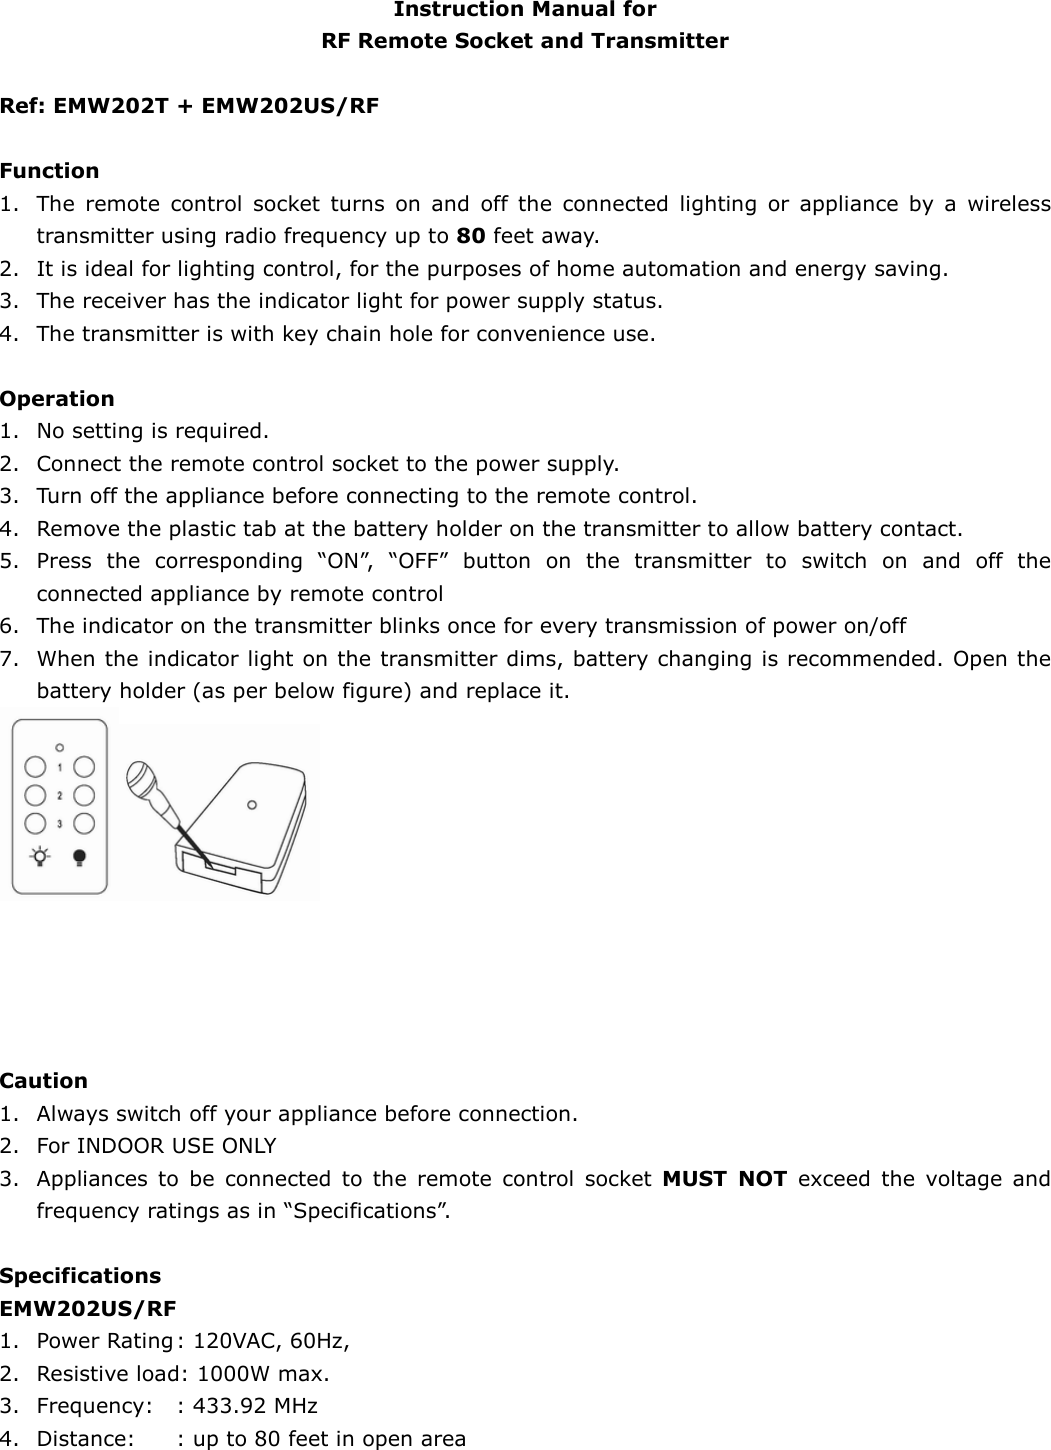   Instruction Manual for   RF Remote Socket and Transmitter  Ref: EMW202T + EMW202US/RF    Function 1. The  remote  control  socket  turns  on  and  off  the  connected  lighting  or  appliance  by  a  wireless transmitter using radio frequency up to 80 feet away. 2. It is ideal for lighting control, for the purposes of home automation and energy saving. 3. The receiver has the indicator light for power supply status.   4. The transmitter is with key chain hole for convenience use.                                       Operation   1. No setting is required.   2. Connect the remote control socket to the power supply. 3. Turn off the appliance before connecting to the remote control.   4. Remove the plastic tab at the battery holder on the transmitter to allow battery contact.     5. Press  the  corresponding  “ON”,  “OFF”  button  on  the  transmitter  to  switch  on  and  off  the connected appliance by remote control 6. The indicator on the transmitter blinks once for every transmission of power on/off   7. When the indicator light on the transmitter dims, battery changing is recommended. Open the battery holder (as per below figure) and replace it.                                     Caution 1. Always switch off your appliance before connection. 2. For INDOOR USE ONLY   3. Appliances  to  be  connected  to  the  remote  control  socket  MUST  NOT  exceed  the  voltage  and frequency ratings as in “Specifications”.  Specifications EMW202US/RF 1. Power Rating : 120VAC, 60Hz, 2. Resistive load: 1000W max.   3. Frequency:    : 433.92 MHz   4. Distance:    : up to 80 feet in open area    